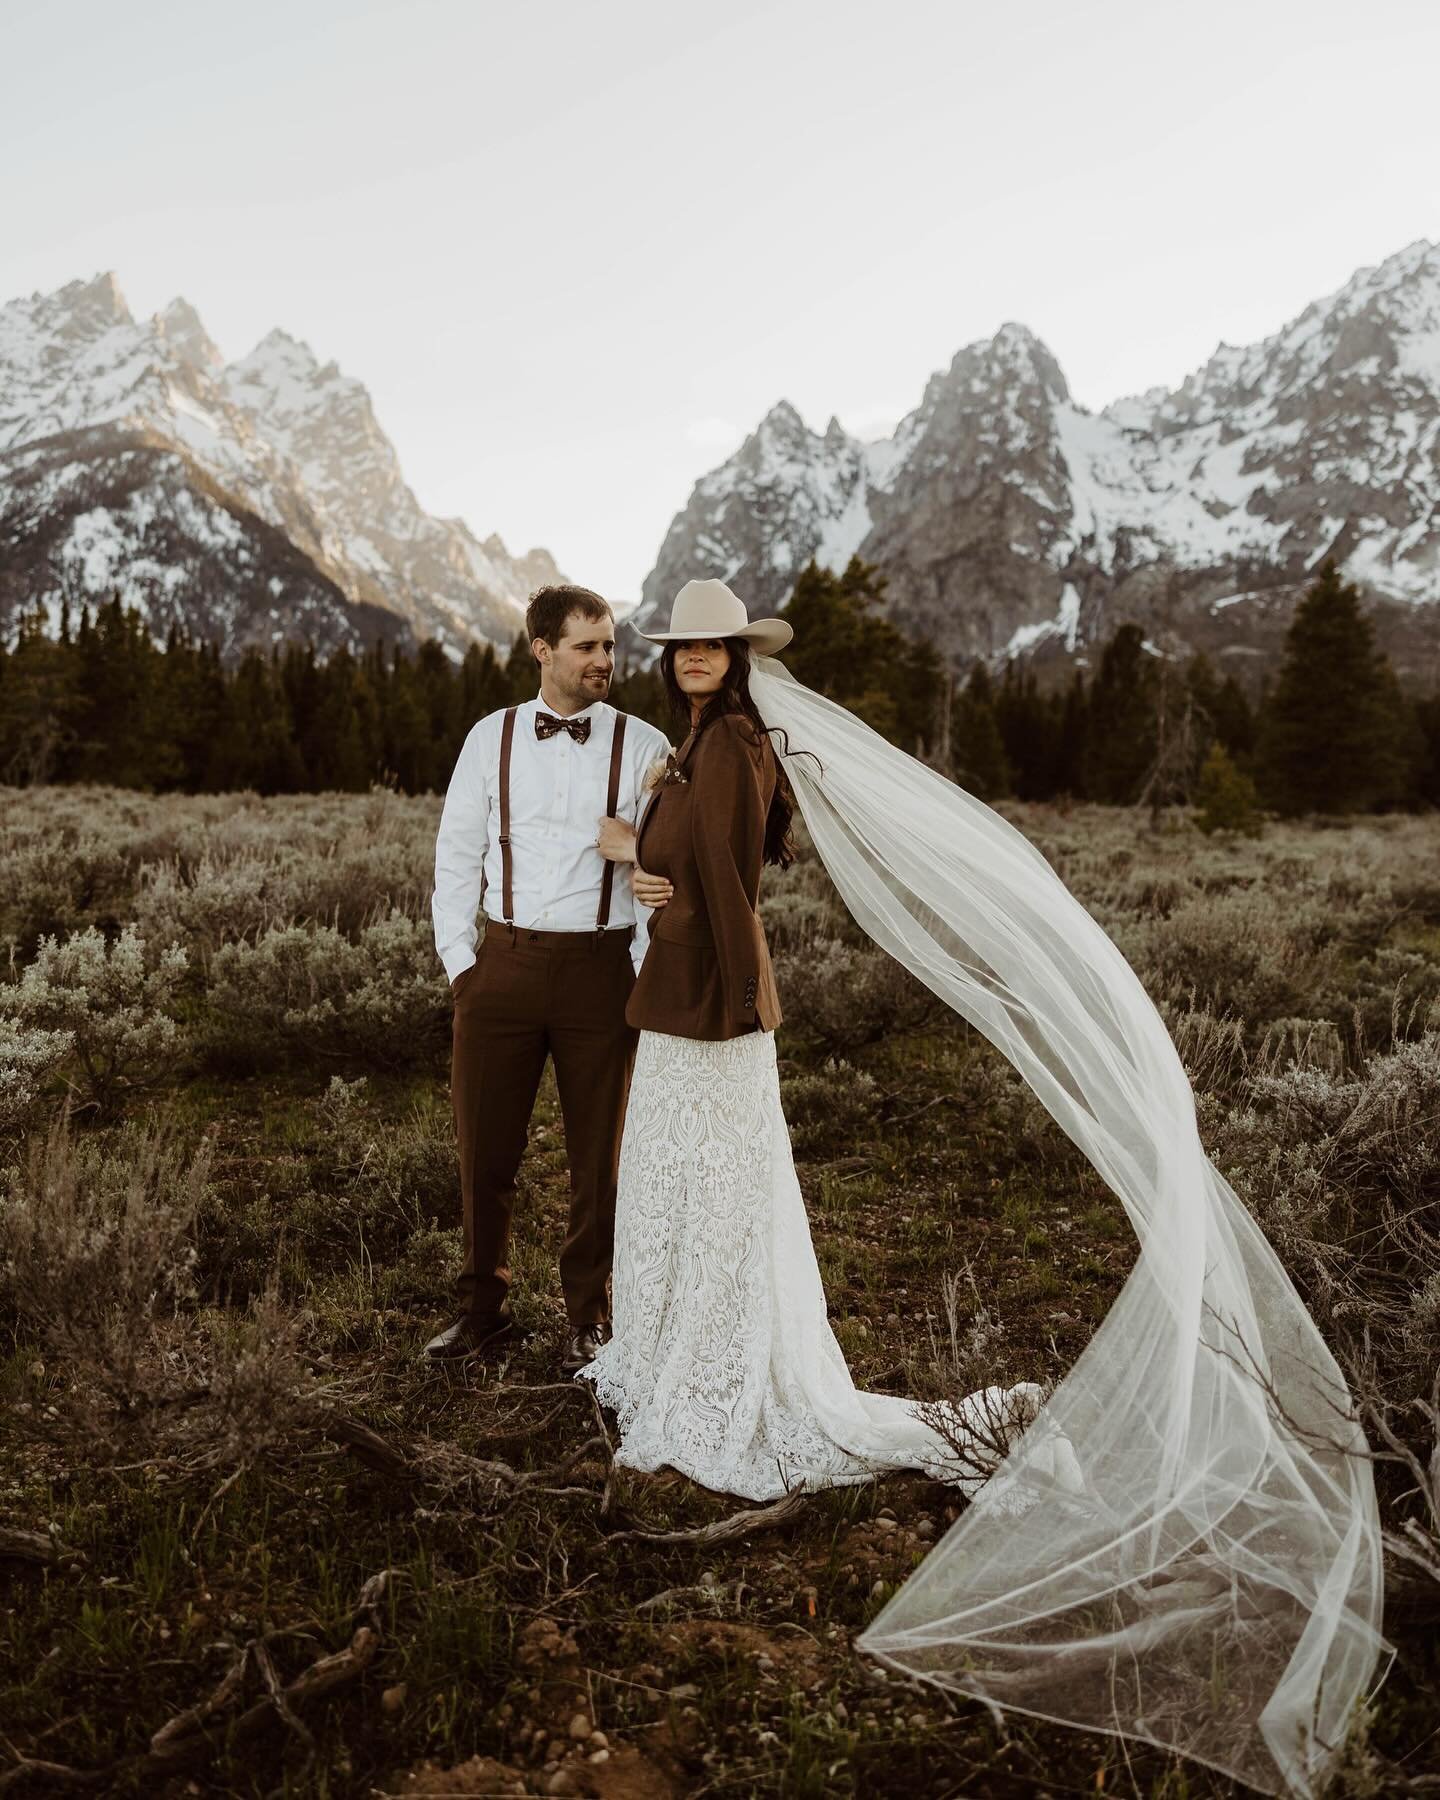 Johannah + Jeff in the Tetons has me living a fever dreaammm 🤠🤩 They were the sweetest most natural couple, who were just so excited to be married to each other. The two most DESERVING people ever 🤍✨ 

Yall make these Tetons somethin special ⛰️ 🤠